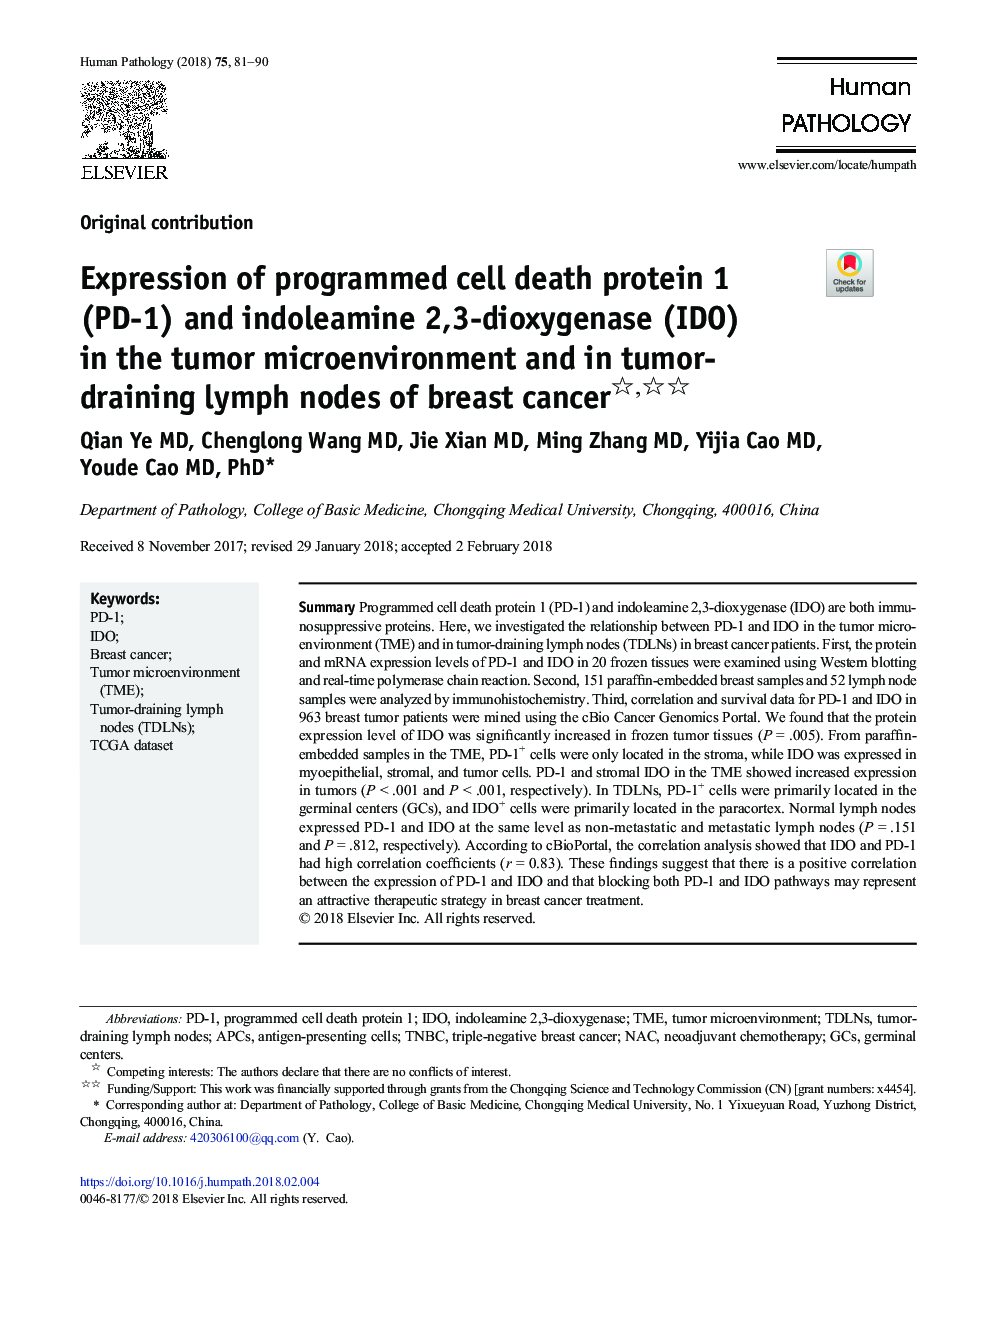 Expression of programmed cell death protein 1 (PD-1) and indoleamine 2,3-dioxygenase (IDO) in the tumor microenvironment and in tumor-draining lymph nodes of breast cancer